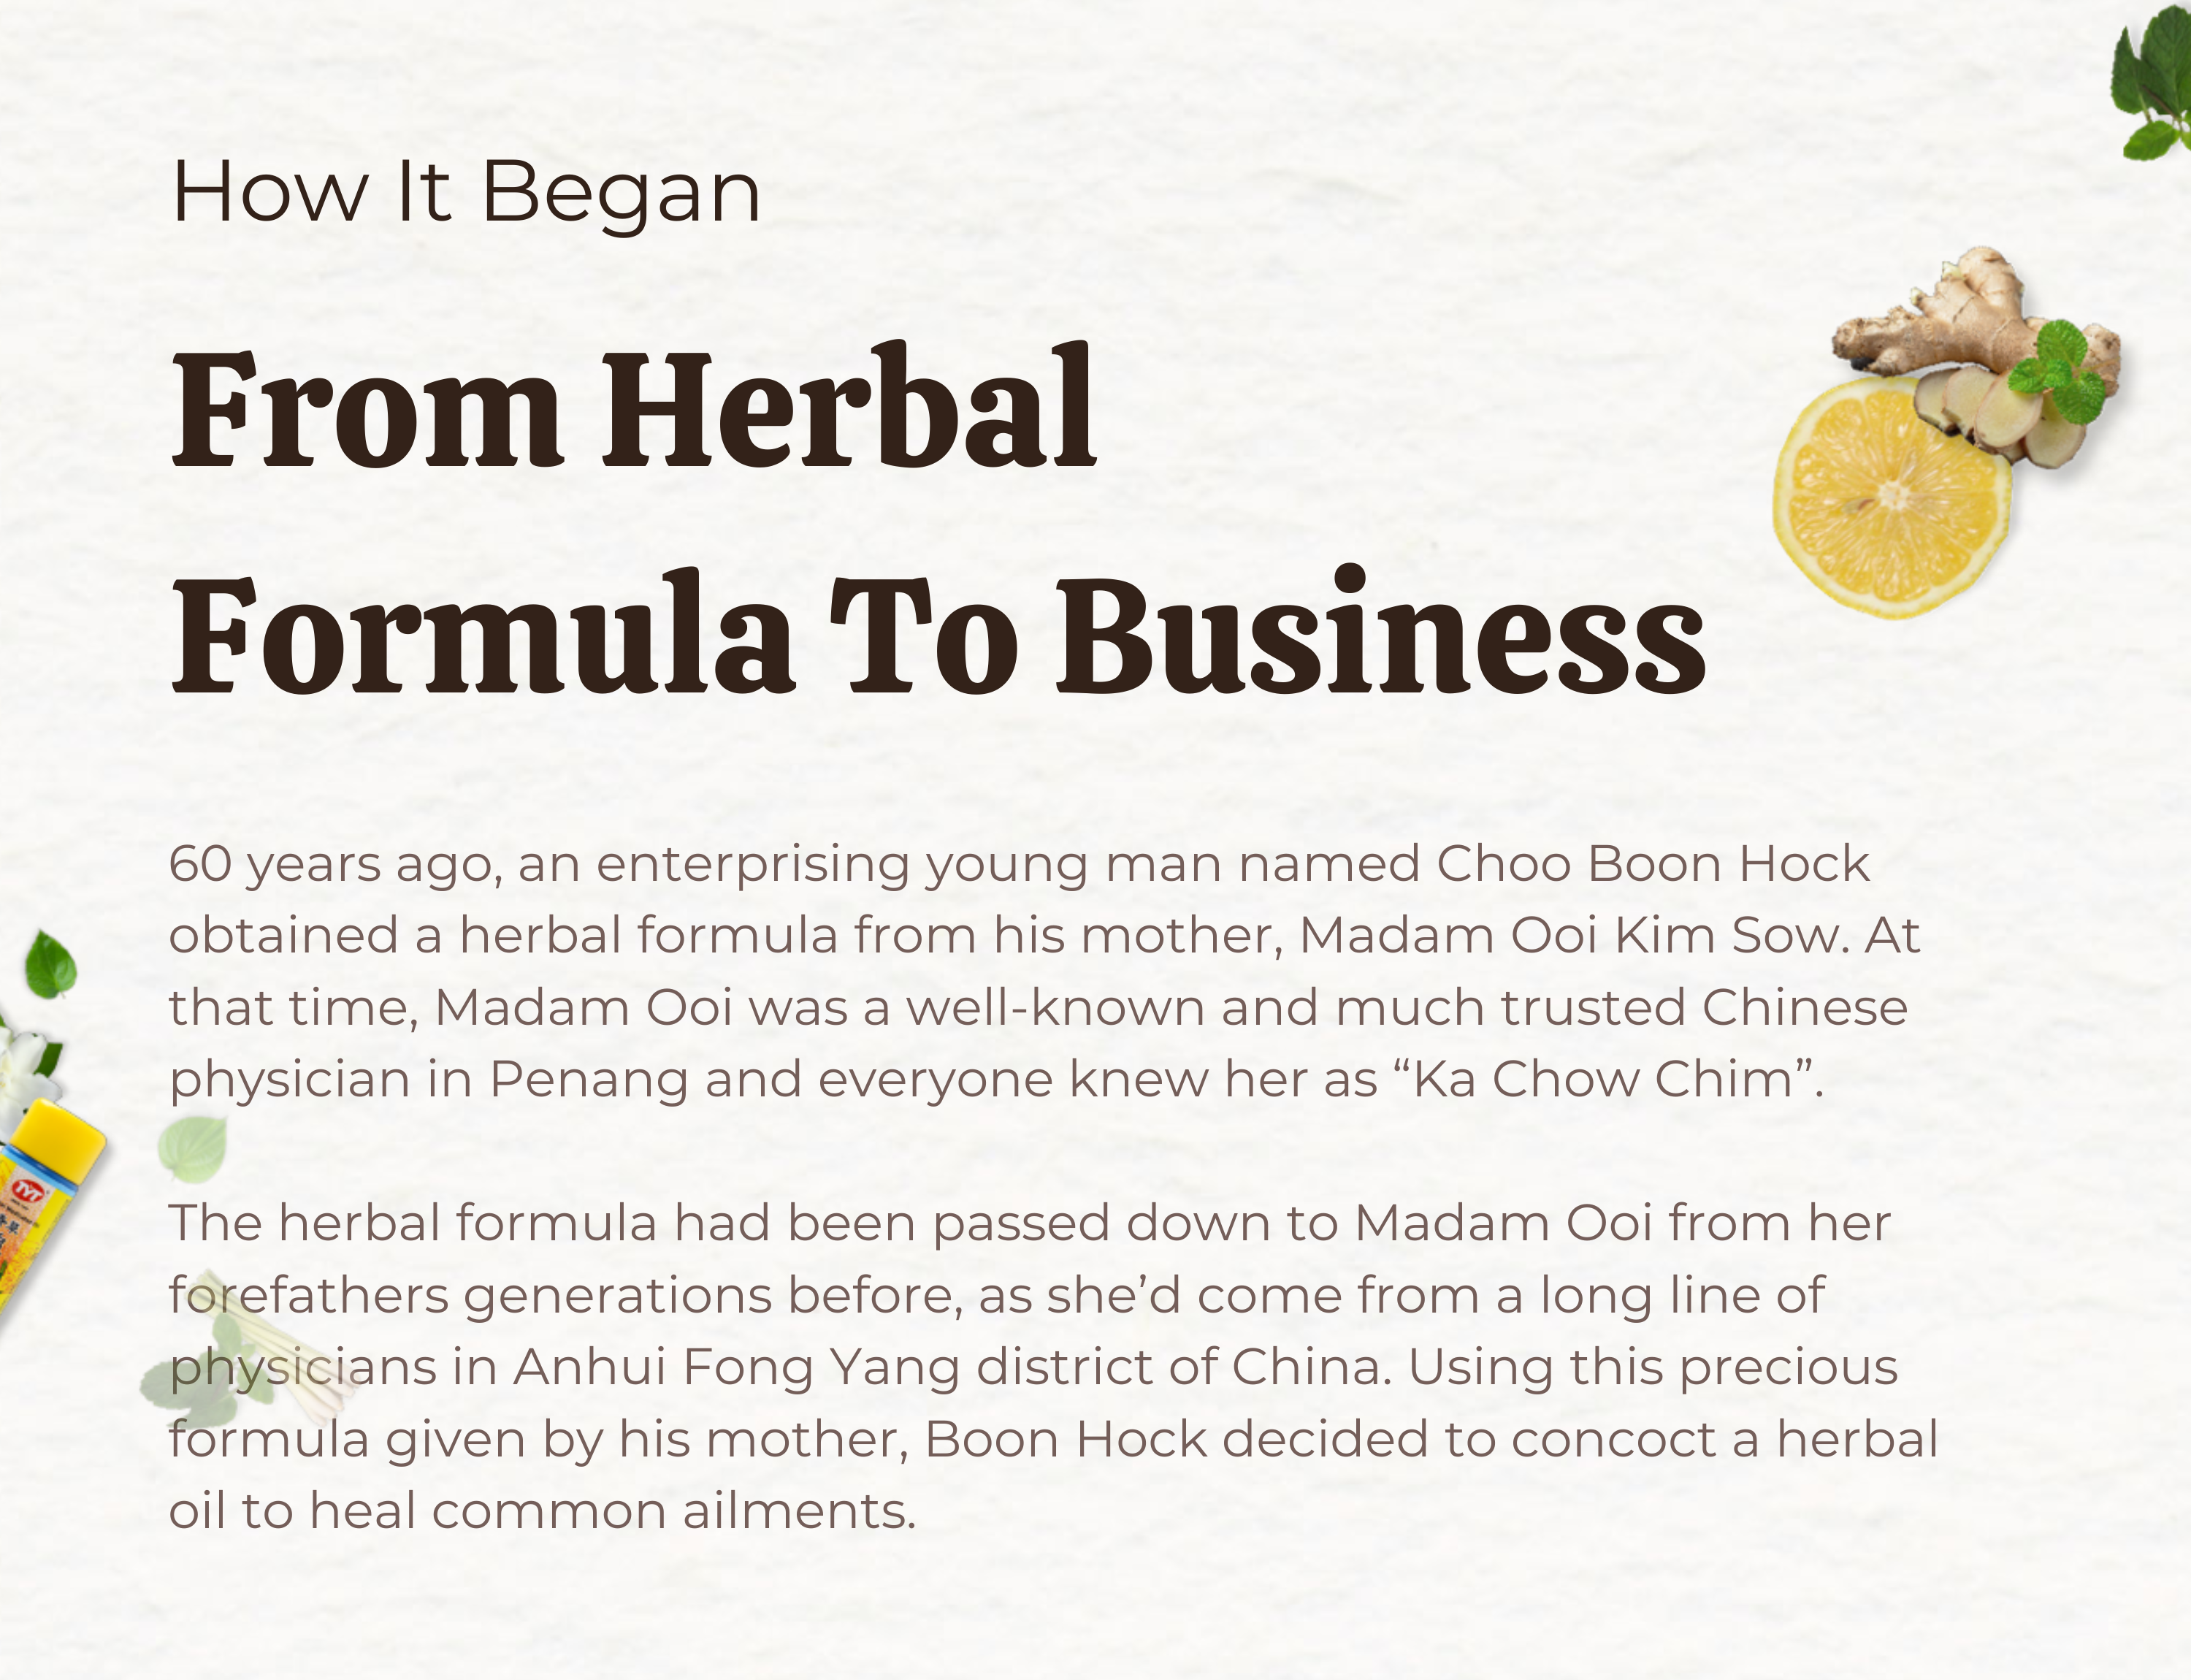 How It Began, From Herbal Formula To Business, 60 years ago an enterprising young man named Choo Boon Hock obtained a herbal formula from his mother Madam Ooi Kim Sow. At that time Madam Ooi was a well-known and much trusted Chinese physician in Penang